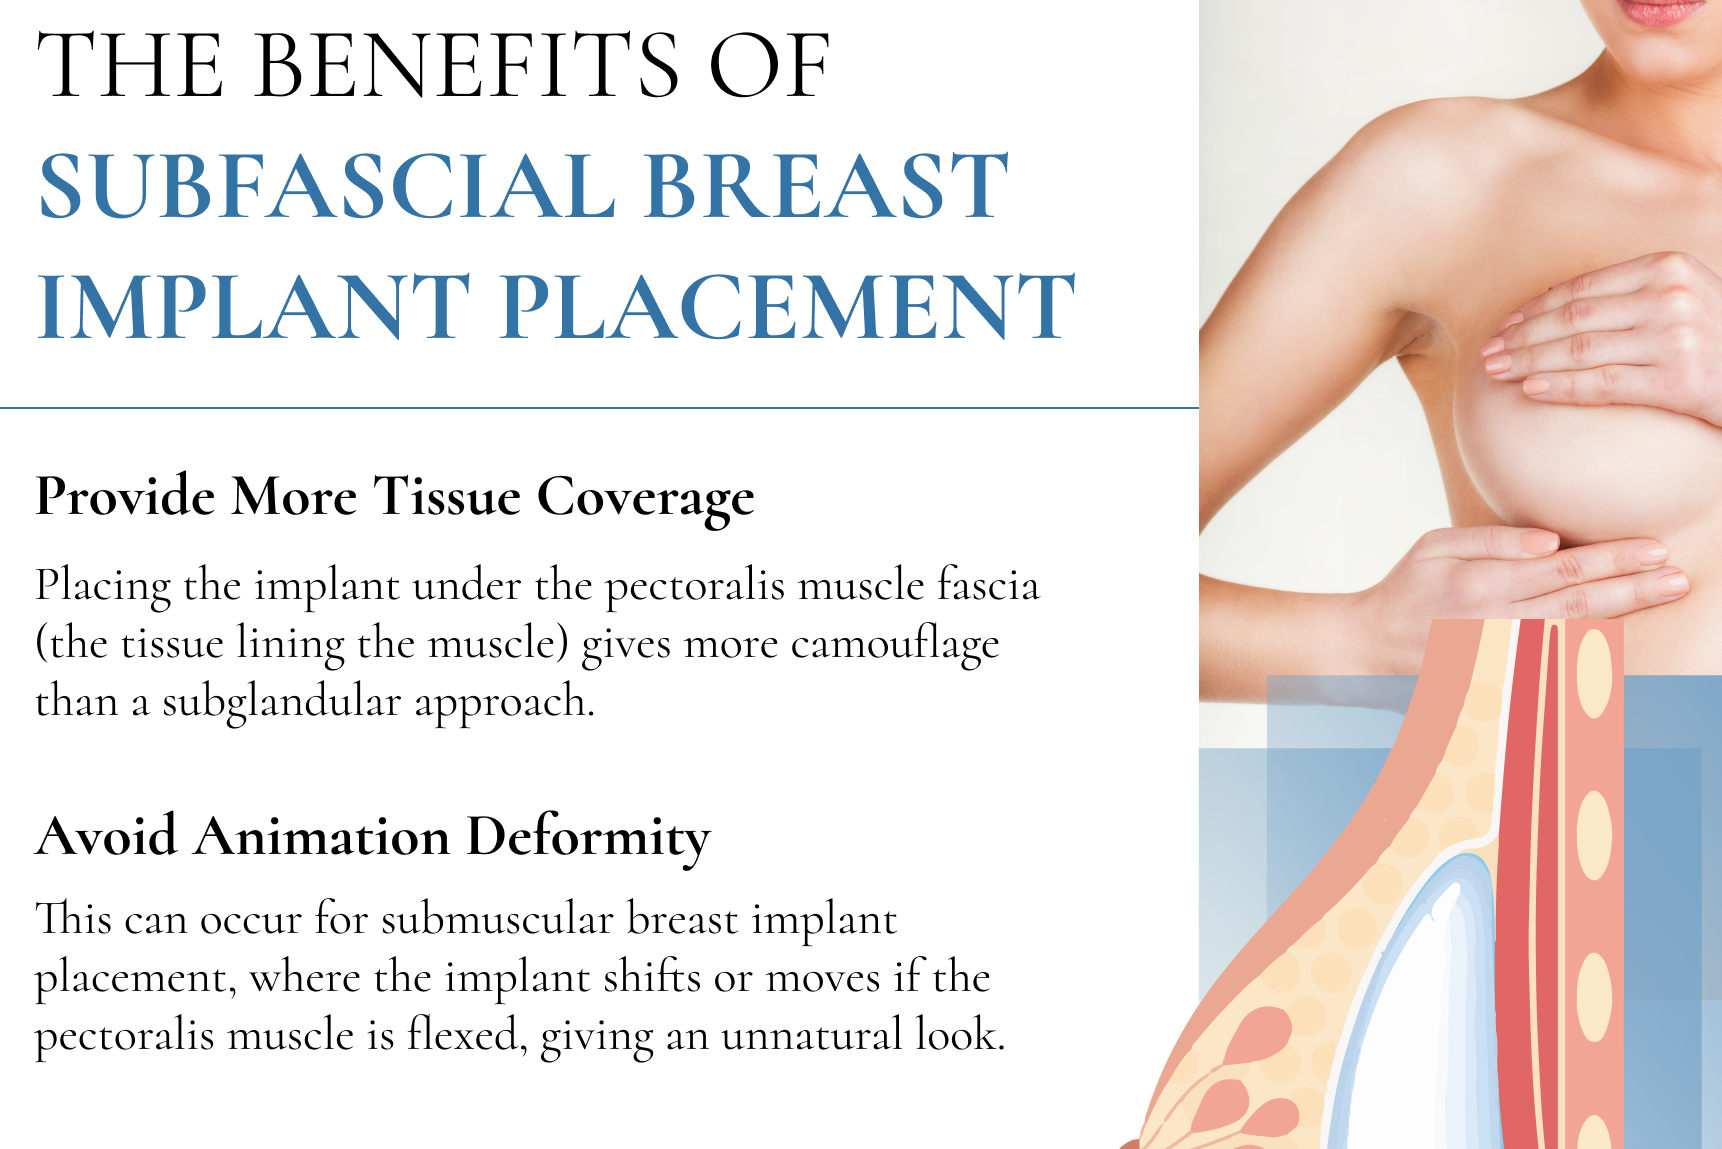 THE BENEFITS OF SUBFASCIAL BREAST IMPLANT PLACEMENT